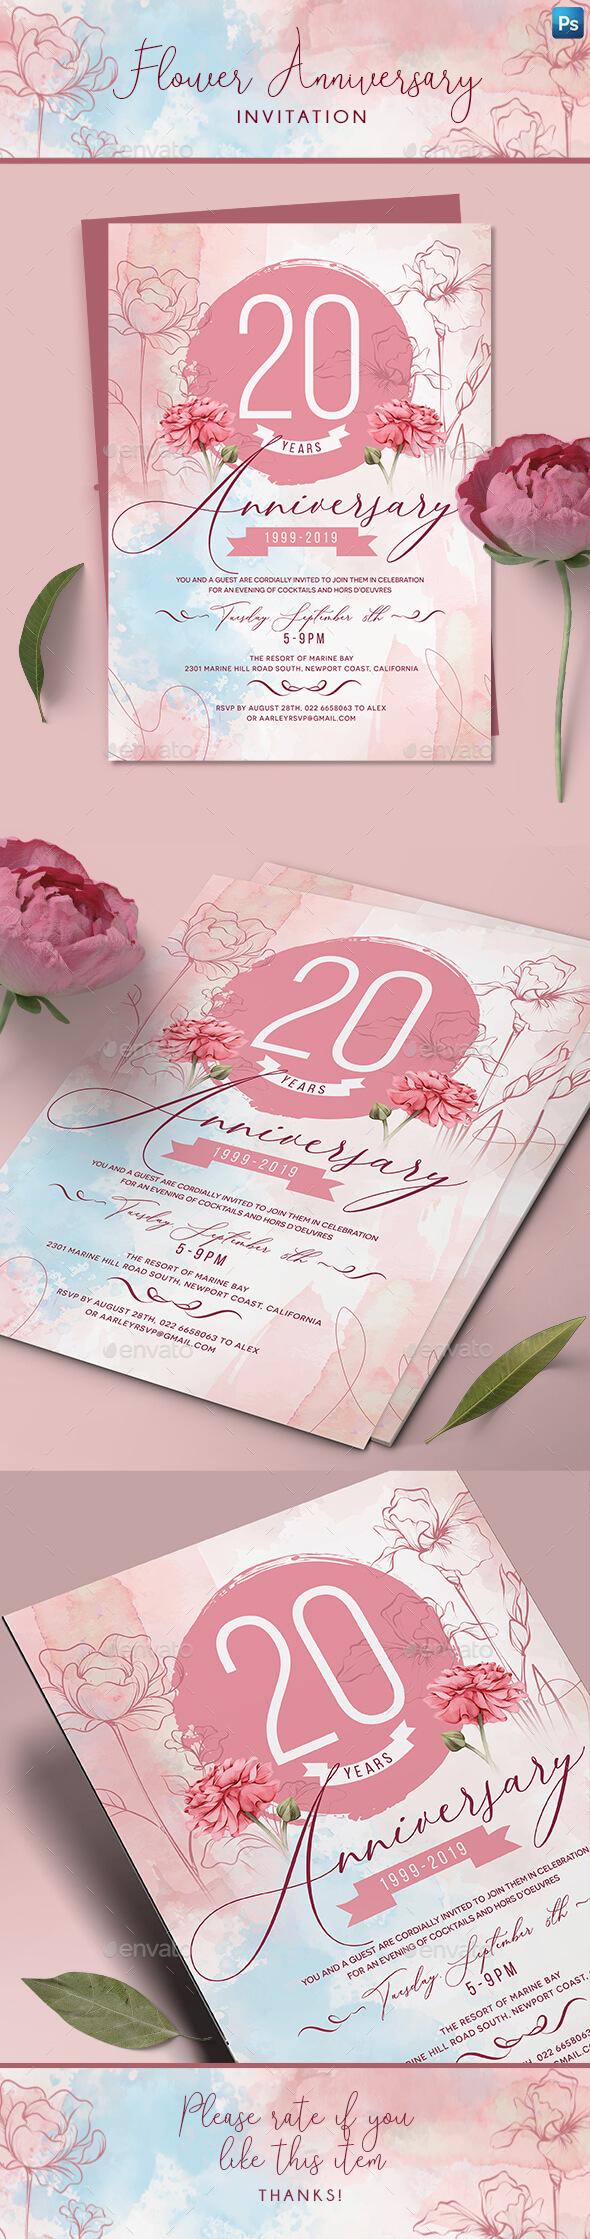 Greeting Card Designs & Templates From Graphicriver Inside Death Anniversary Cards Templates